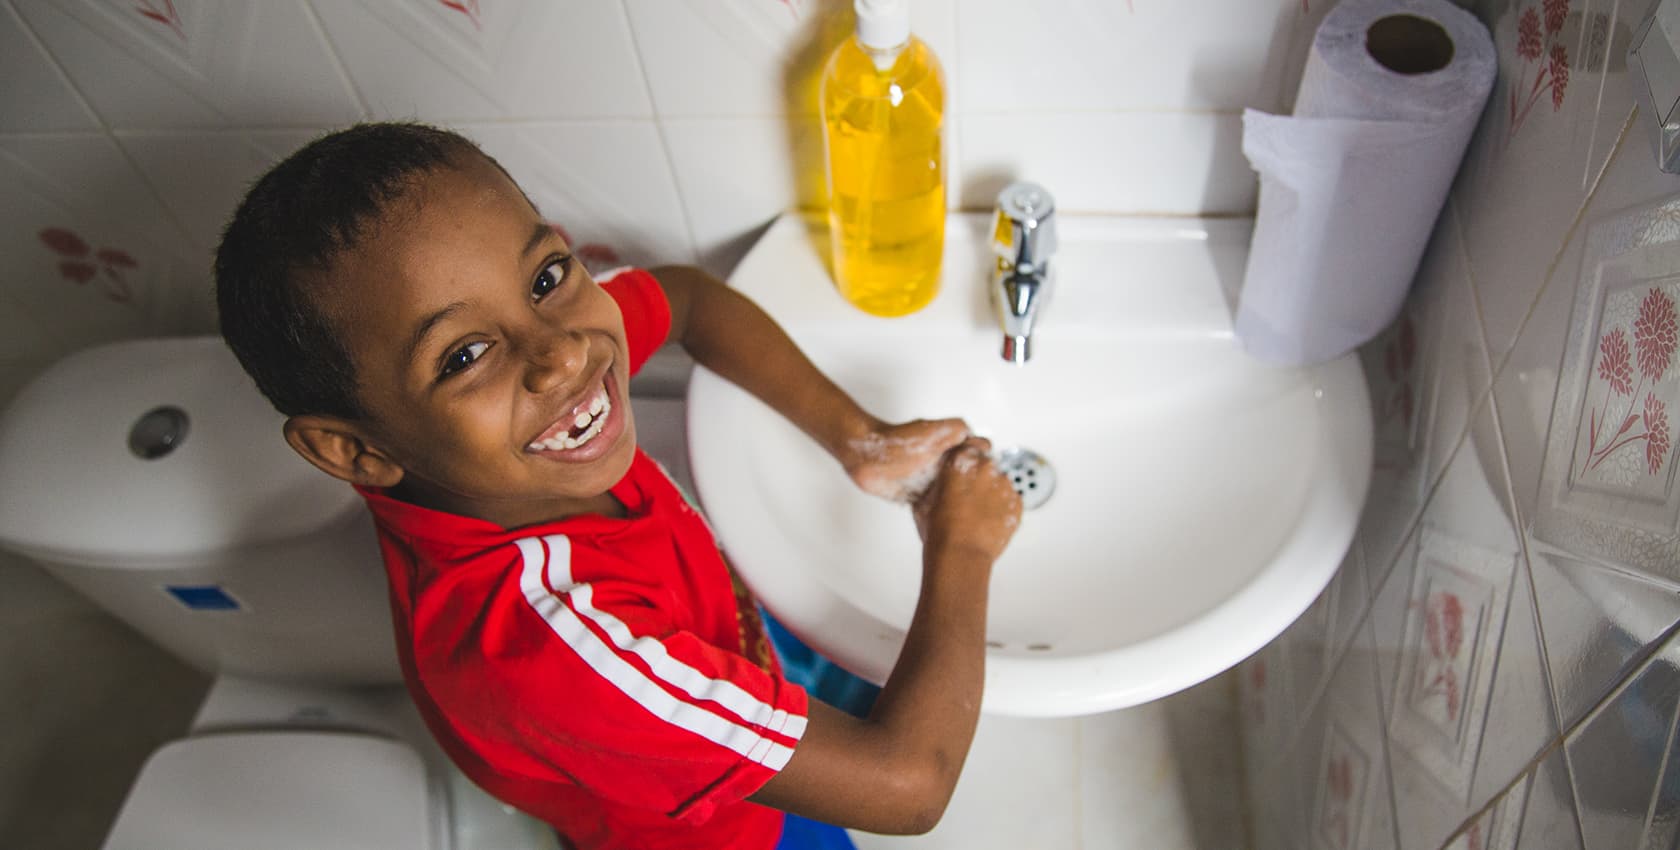 A boy in a red t-shirt washes his hands in sink in a bathroom. He's missing a front tooth.